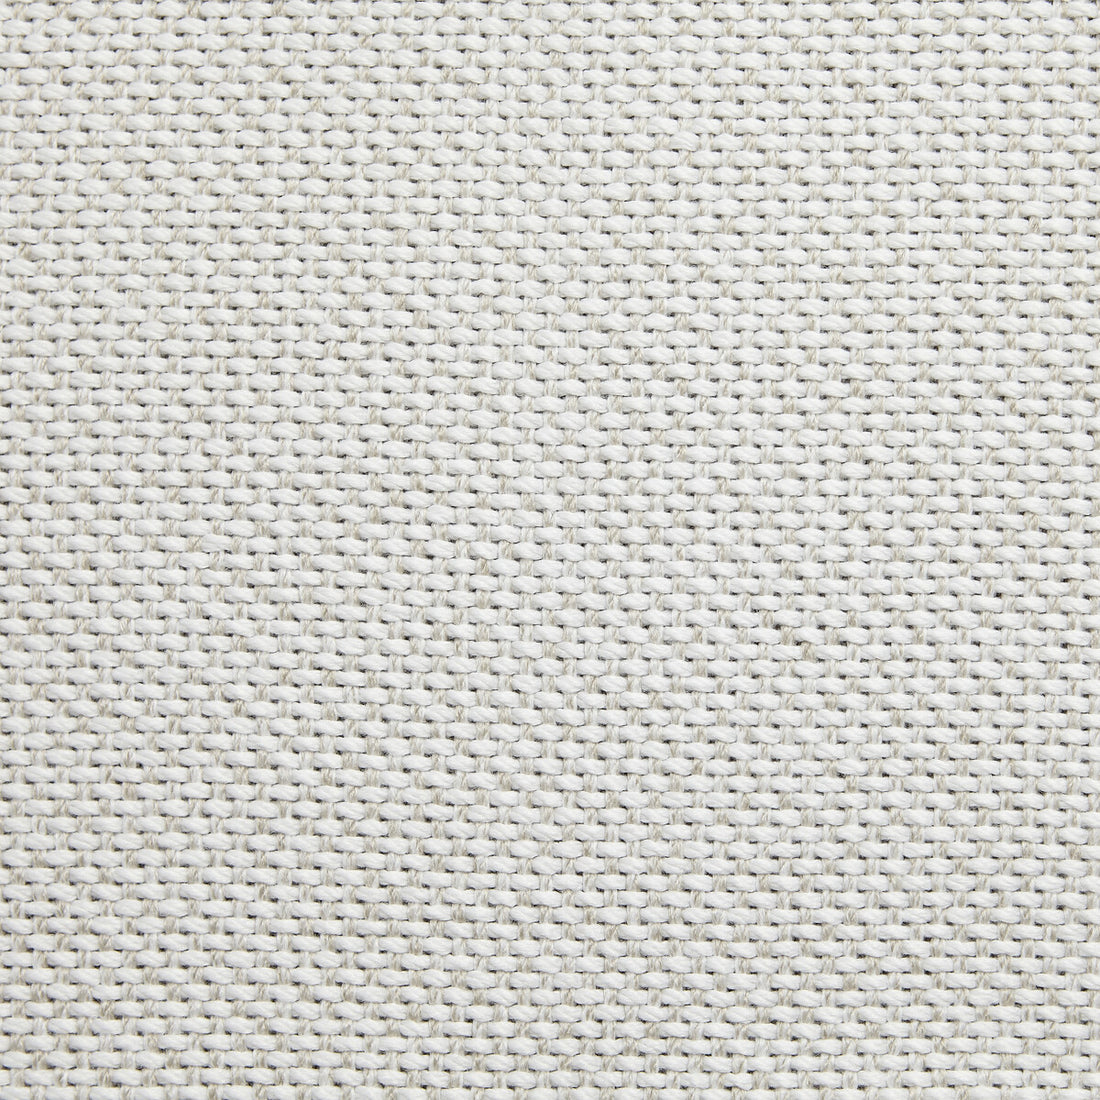 Begur fabric in 7 color - pattern LZ-30397.07.0 - by Kravet Design in the Lizzo Indoor/Outdoor collection